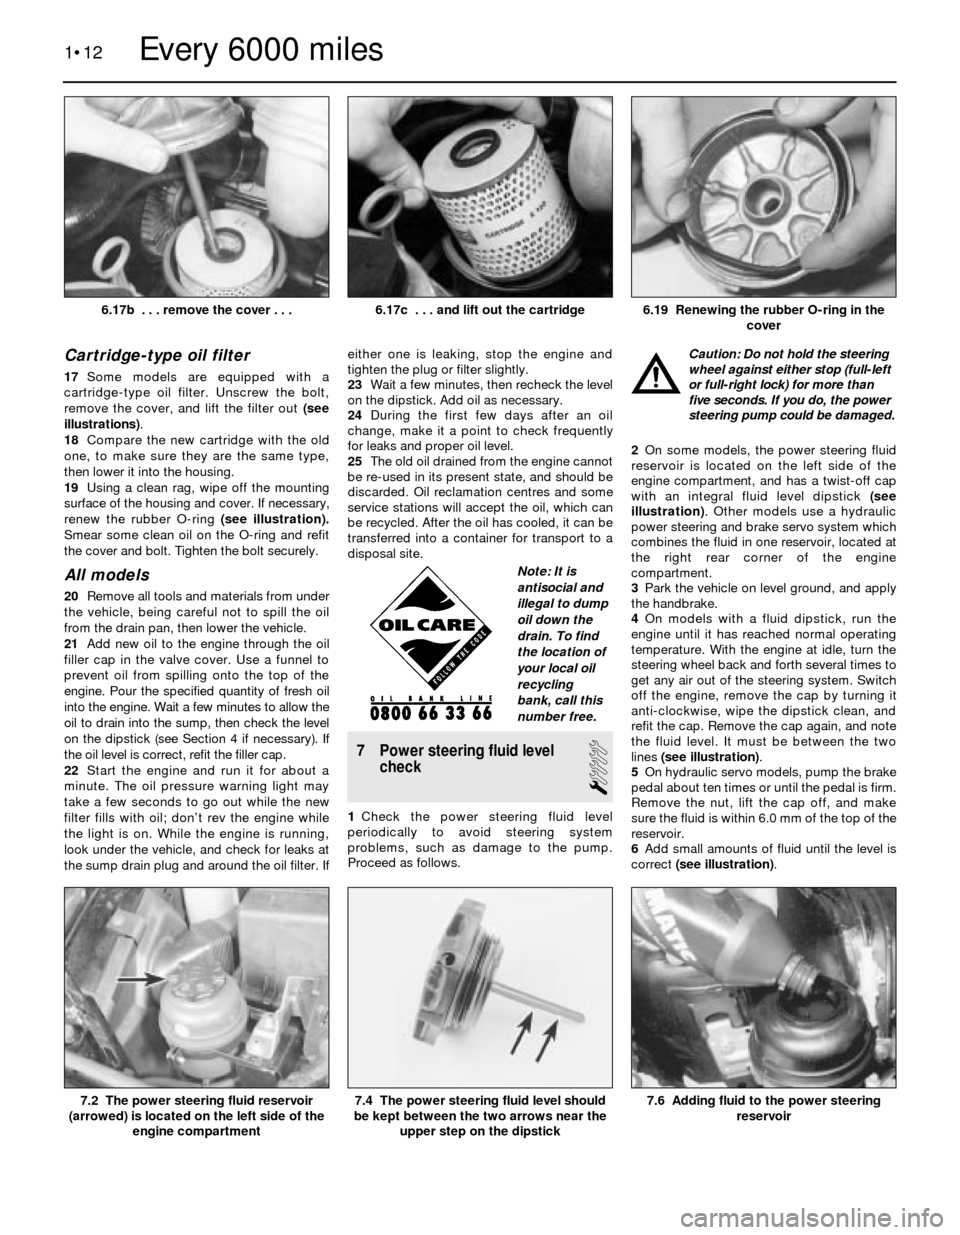 BMW 5 SERIES 1988 E34 Workshop Manual Cartridge-type oil filter
17Some models are equipped with a
cartridge-type oil filter. Unscrew the bolt,
remove the cover, and lift the filter out (see
illustrations).
18Compare the new cartridge with